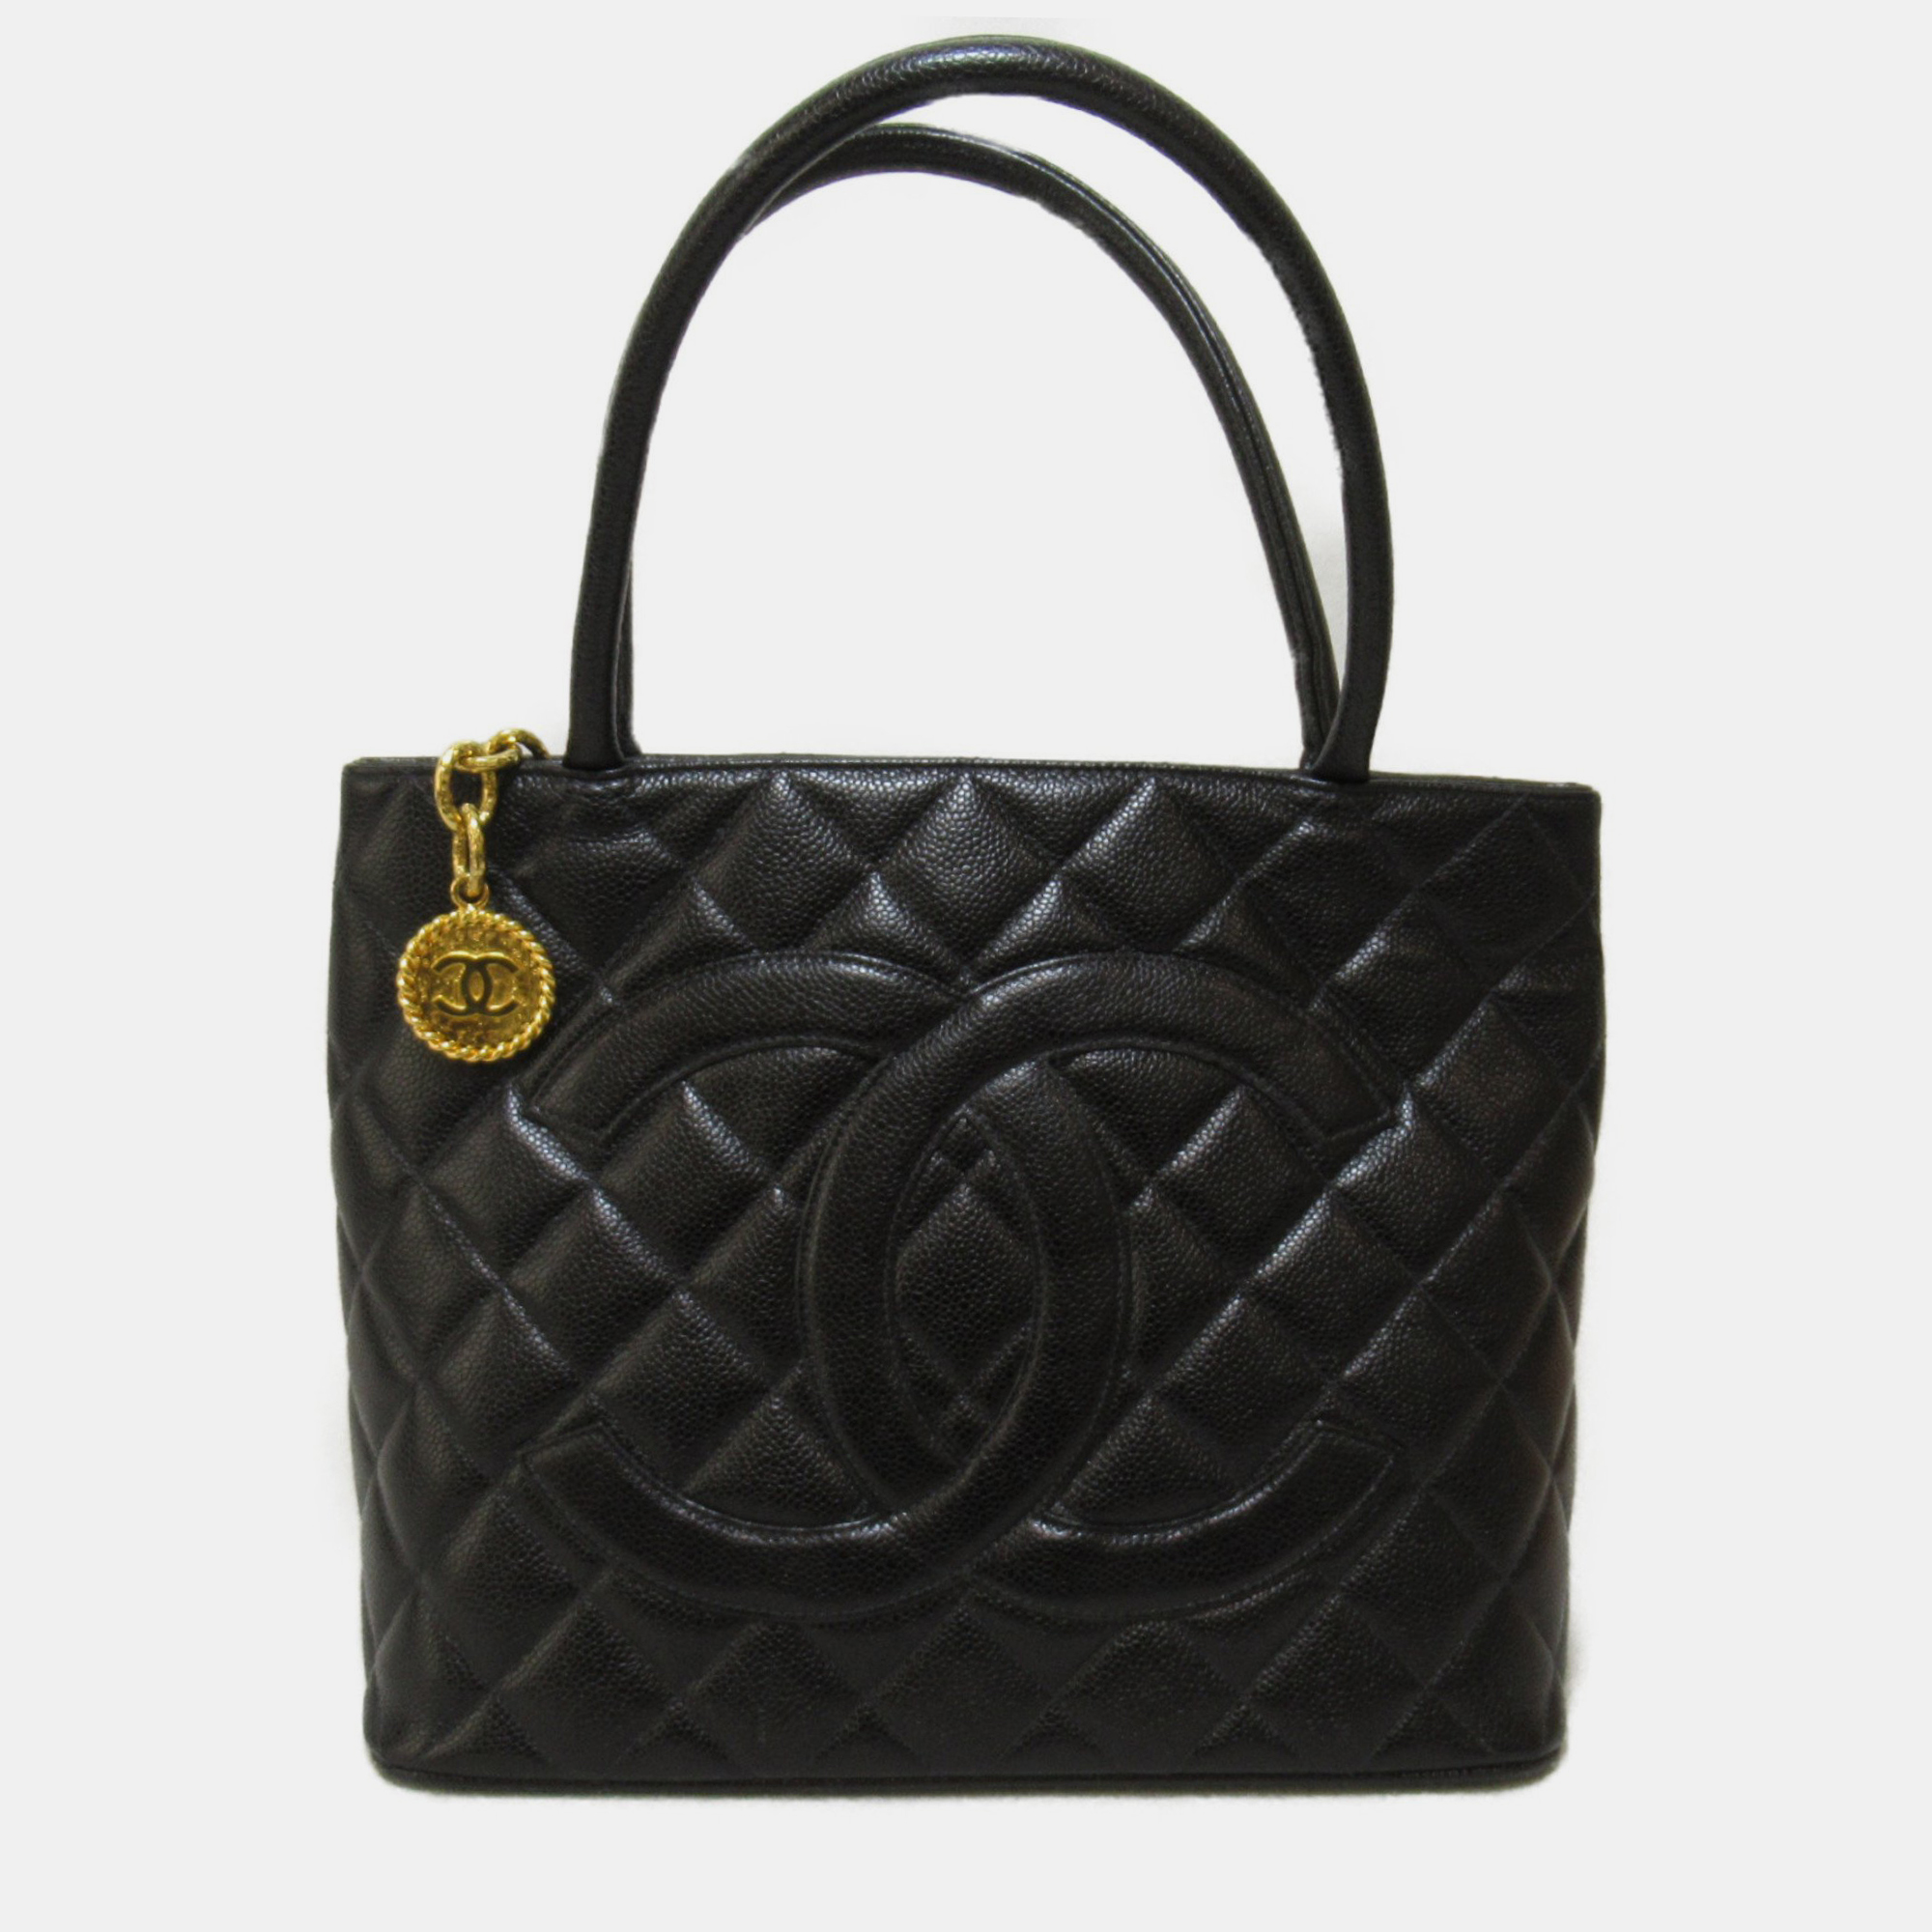 

Chanel Padded Black Caviar Leather Medallion Tote Bag